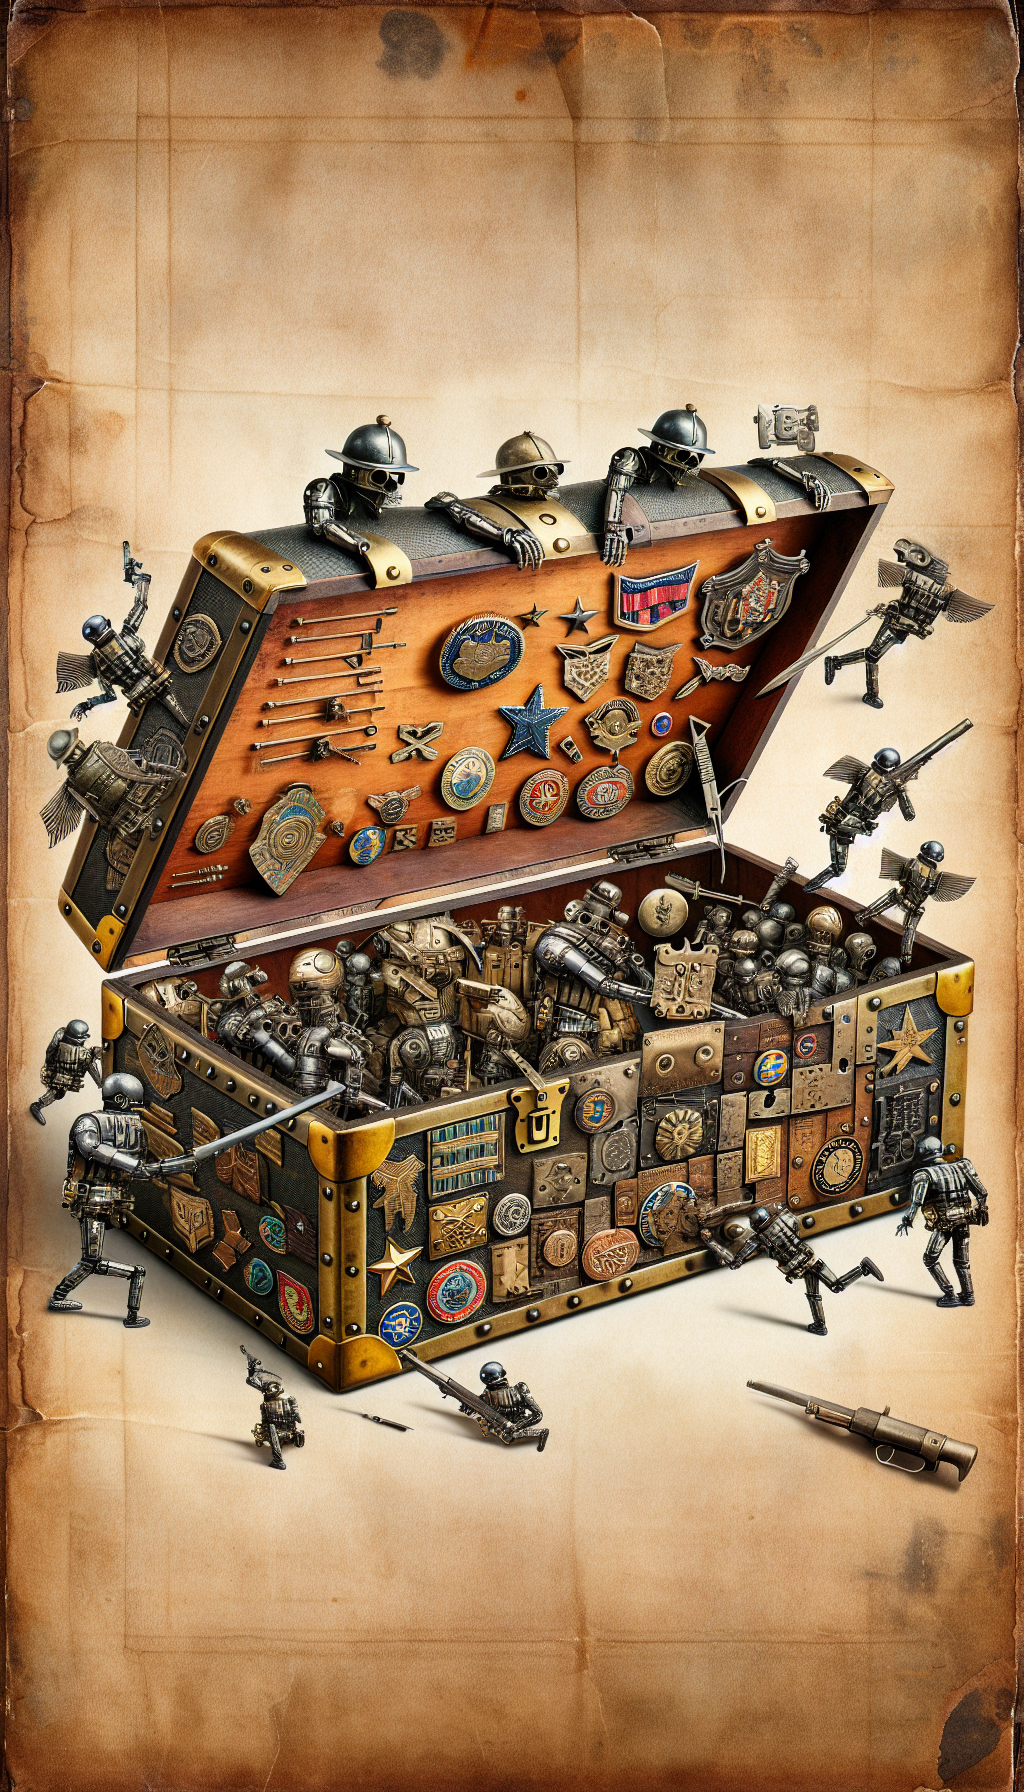 An intricate steampunk-inspired collage depicts a partially open antique military trunk, its brass corners and latches glinting, with various vintage badges, ranks, and insignia morphing into metallic creatures that playfully climb around and examine the hardware, serving as guides to the trunk's history. The textured background hints at old parchment, reinforcing the item's age and authenticity.